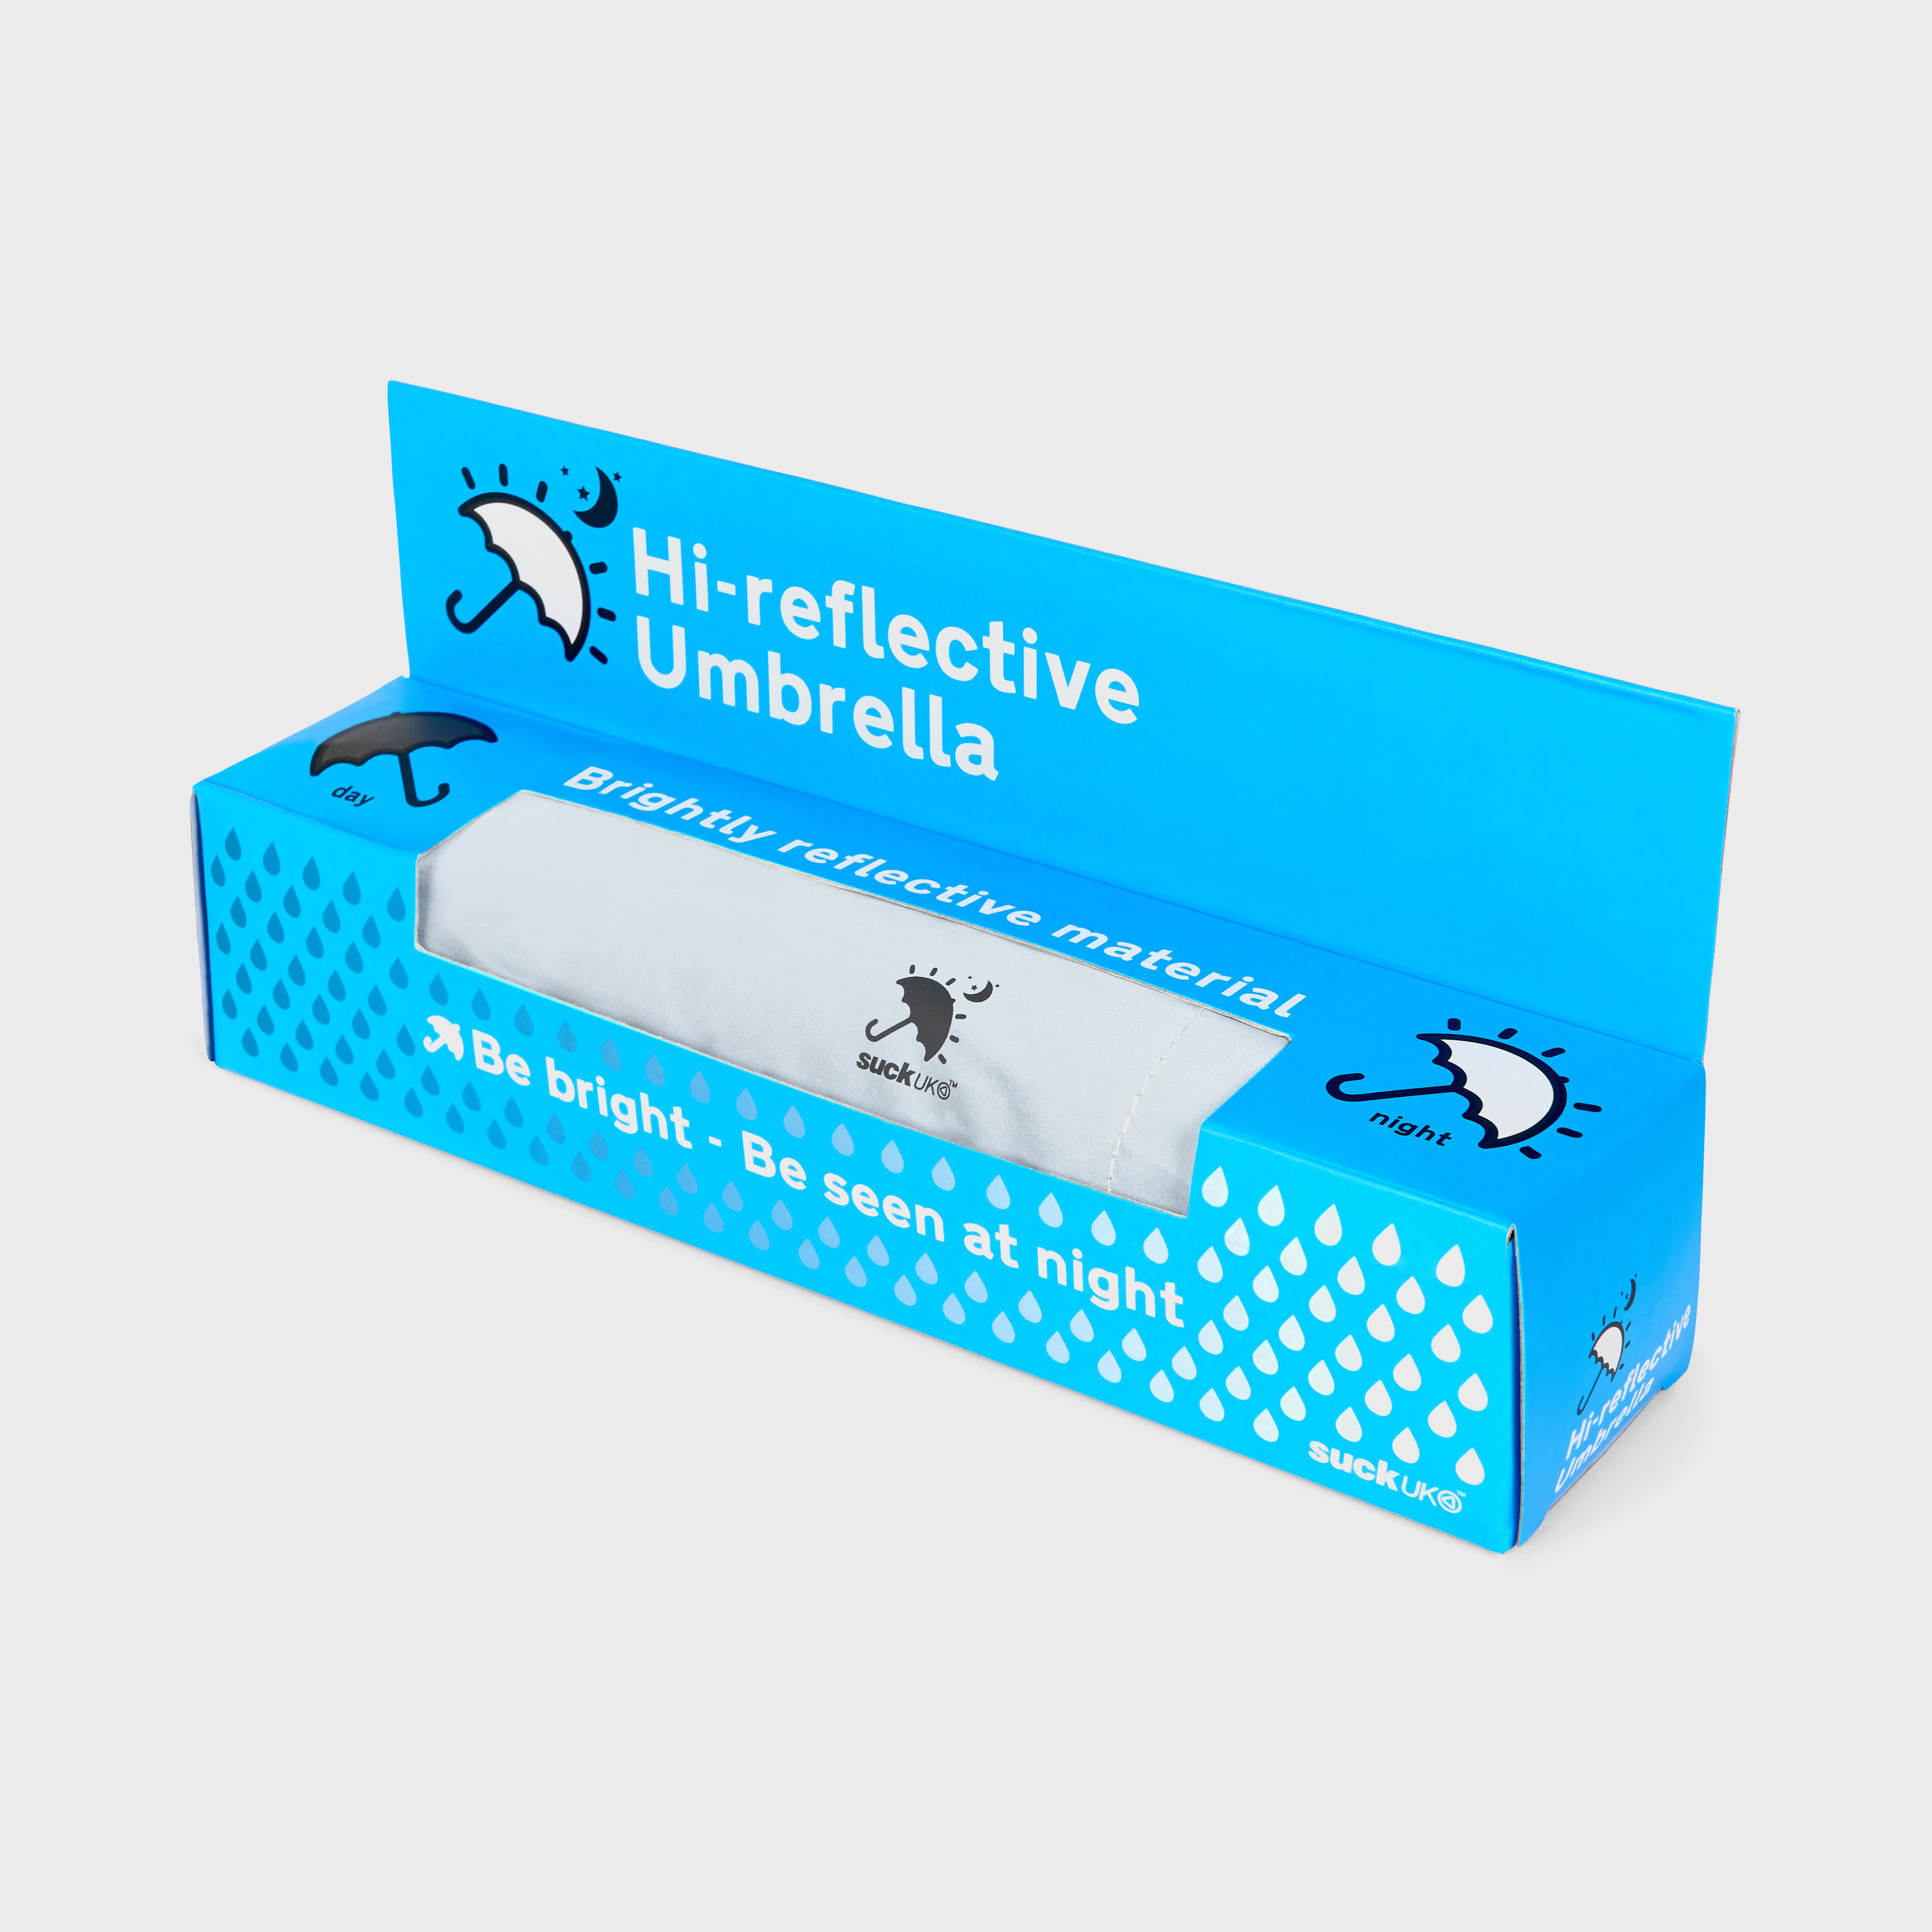 Packaging for Reflective Umbrella - box with window